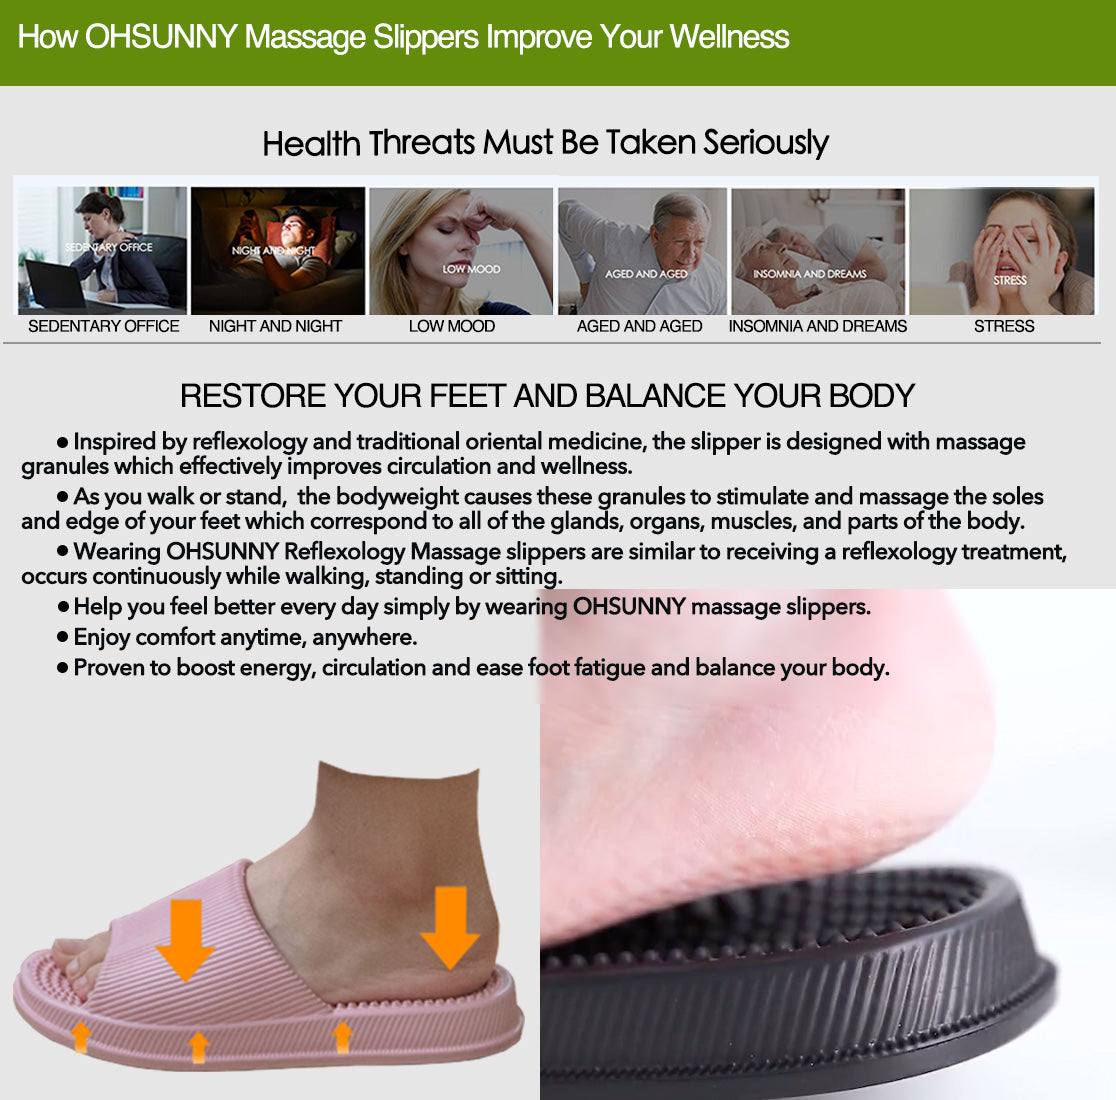 OHSUNNY Massage Slippers